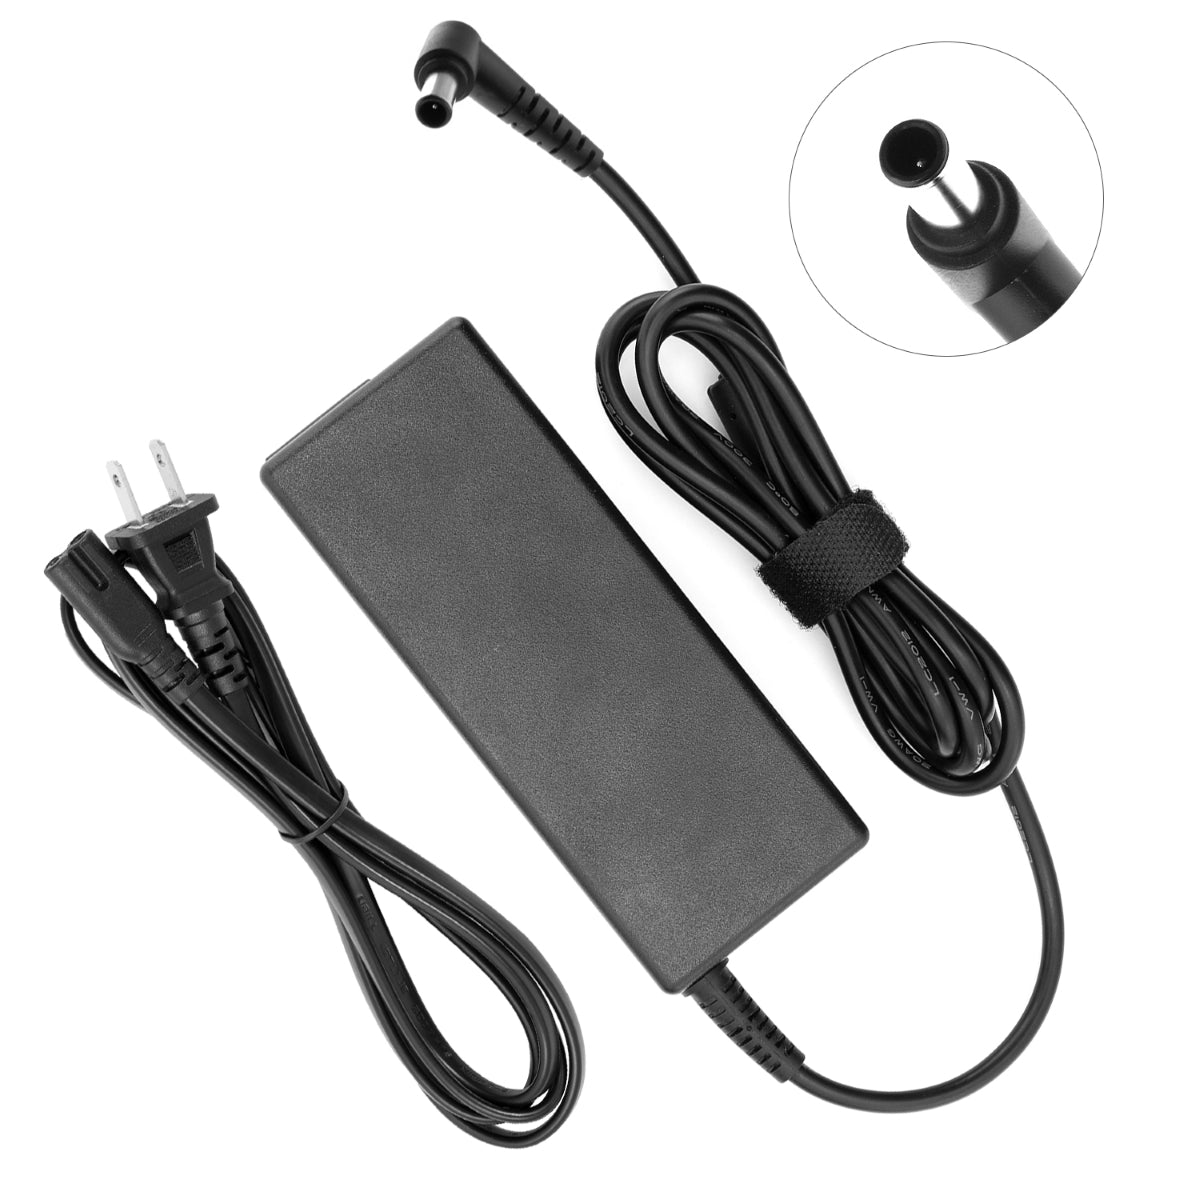 Compatible Charger for Sony Vaio PCGA-AC19V12